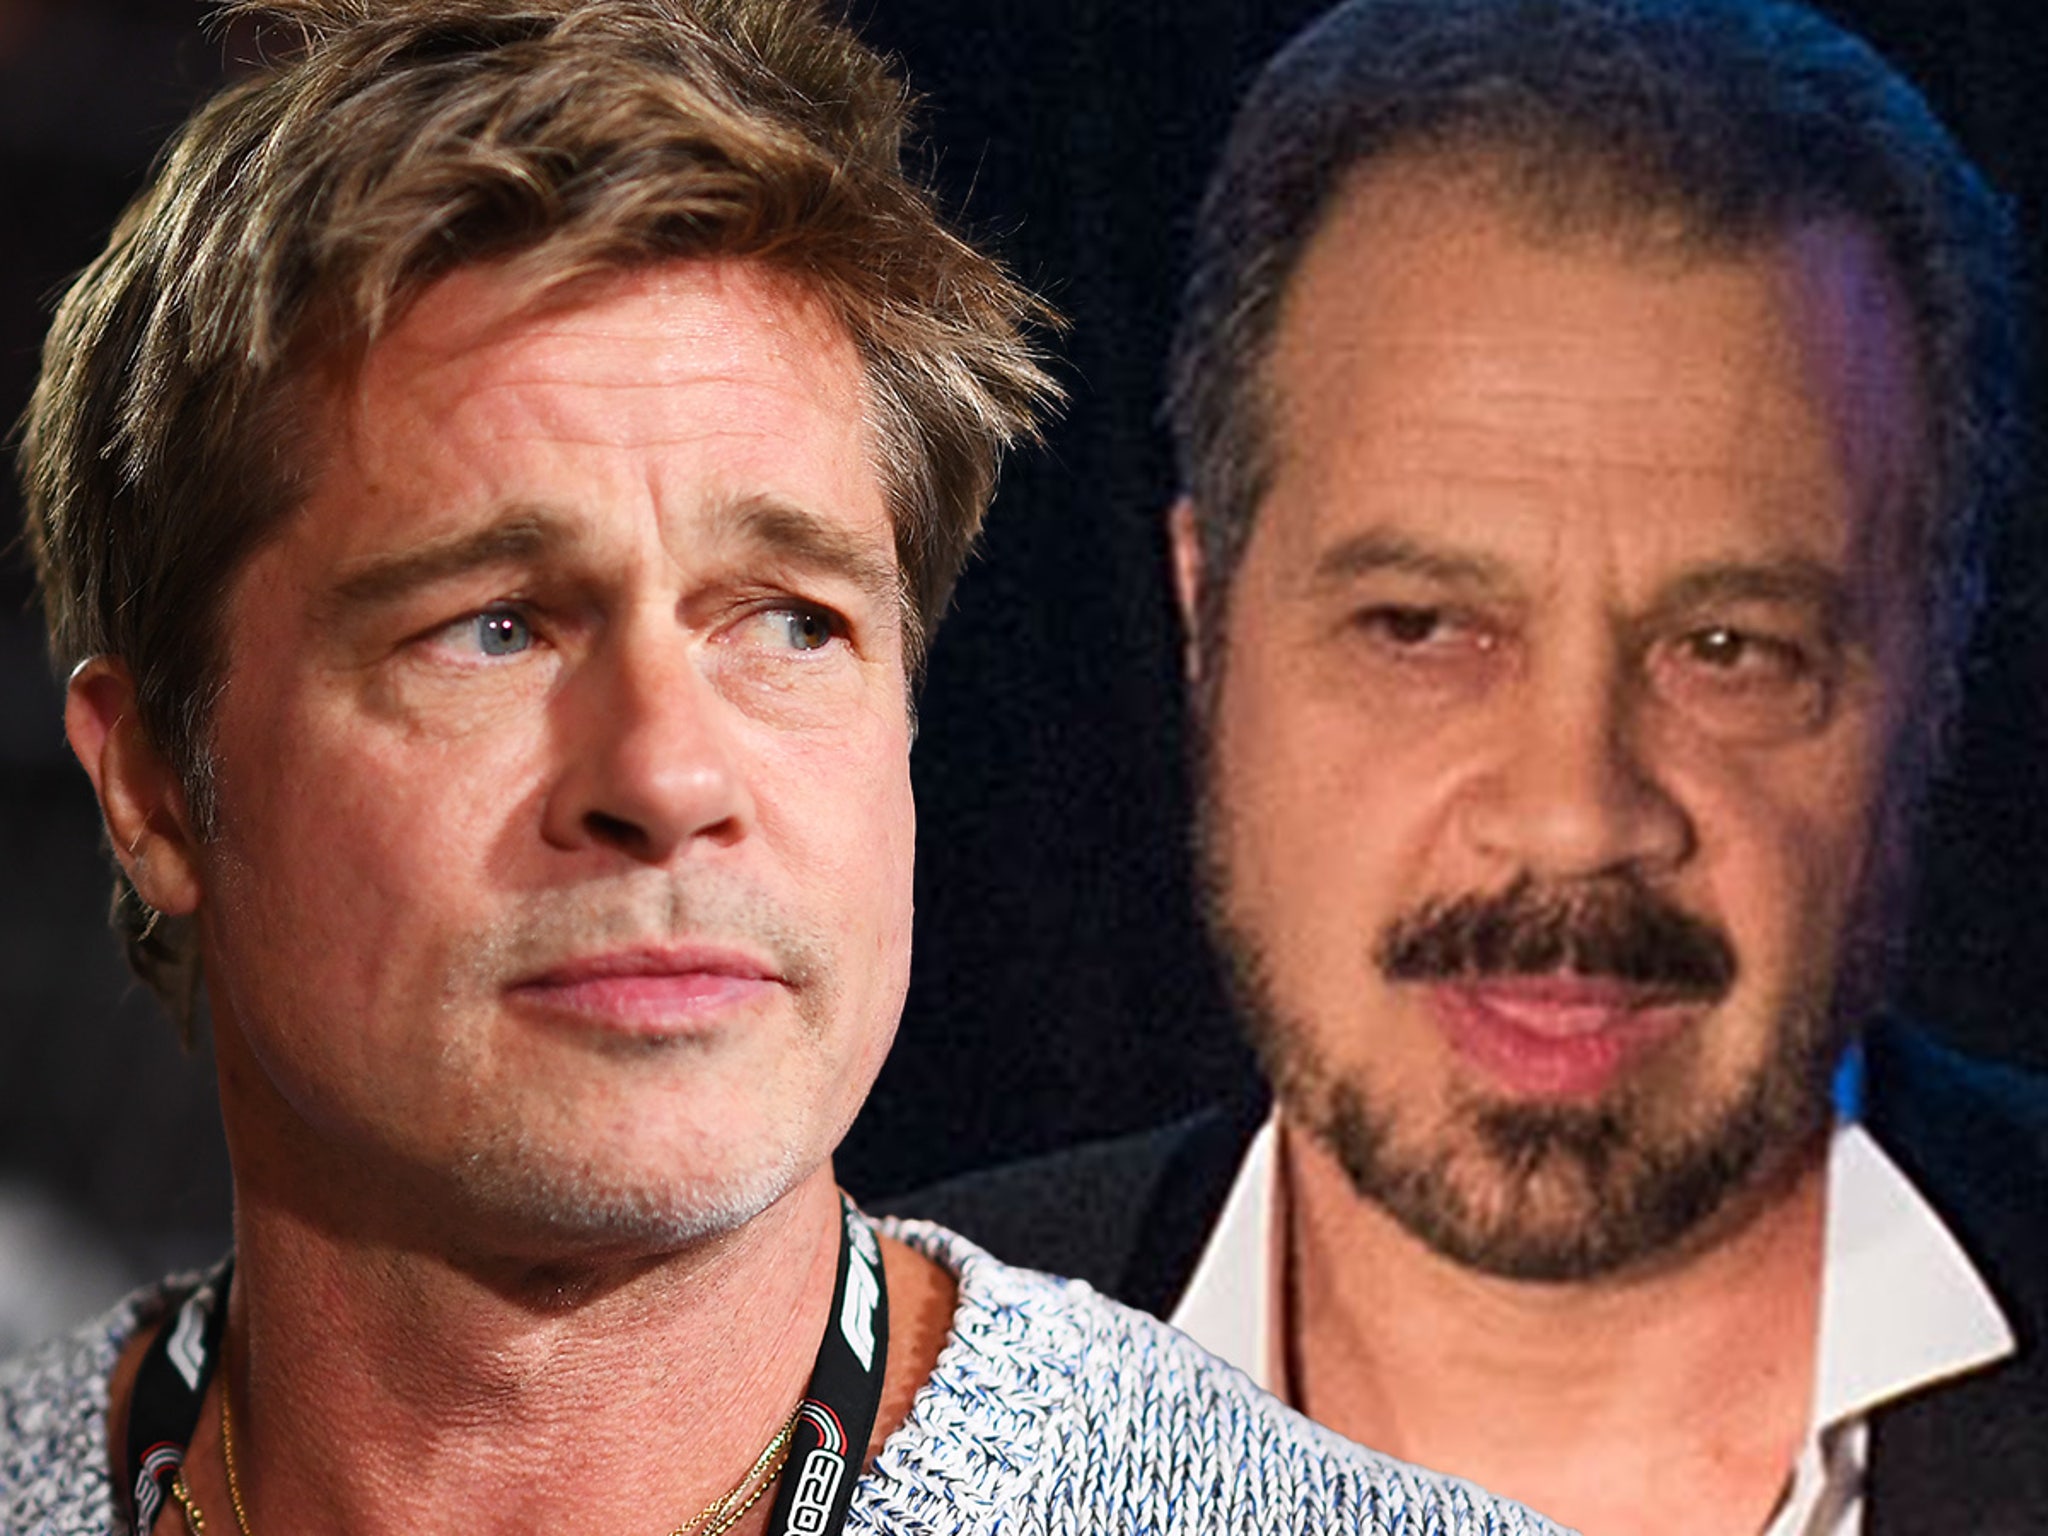 Brad Pitt Was Allegedly 'Volatile' On Set of 'Legends of the Fall